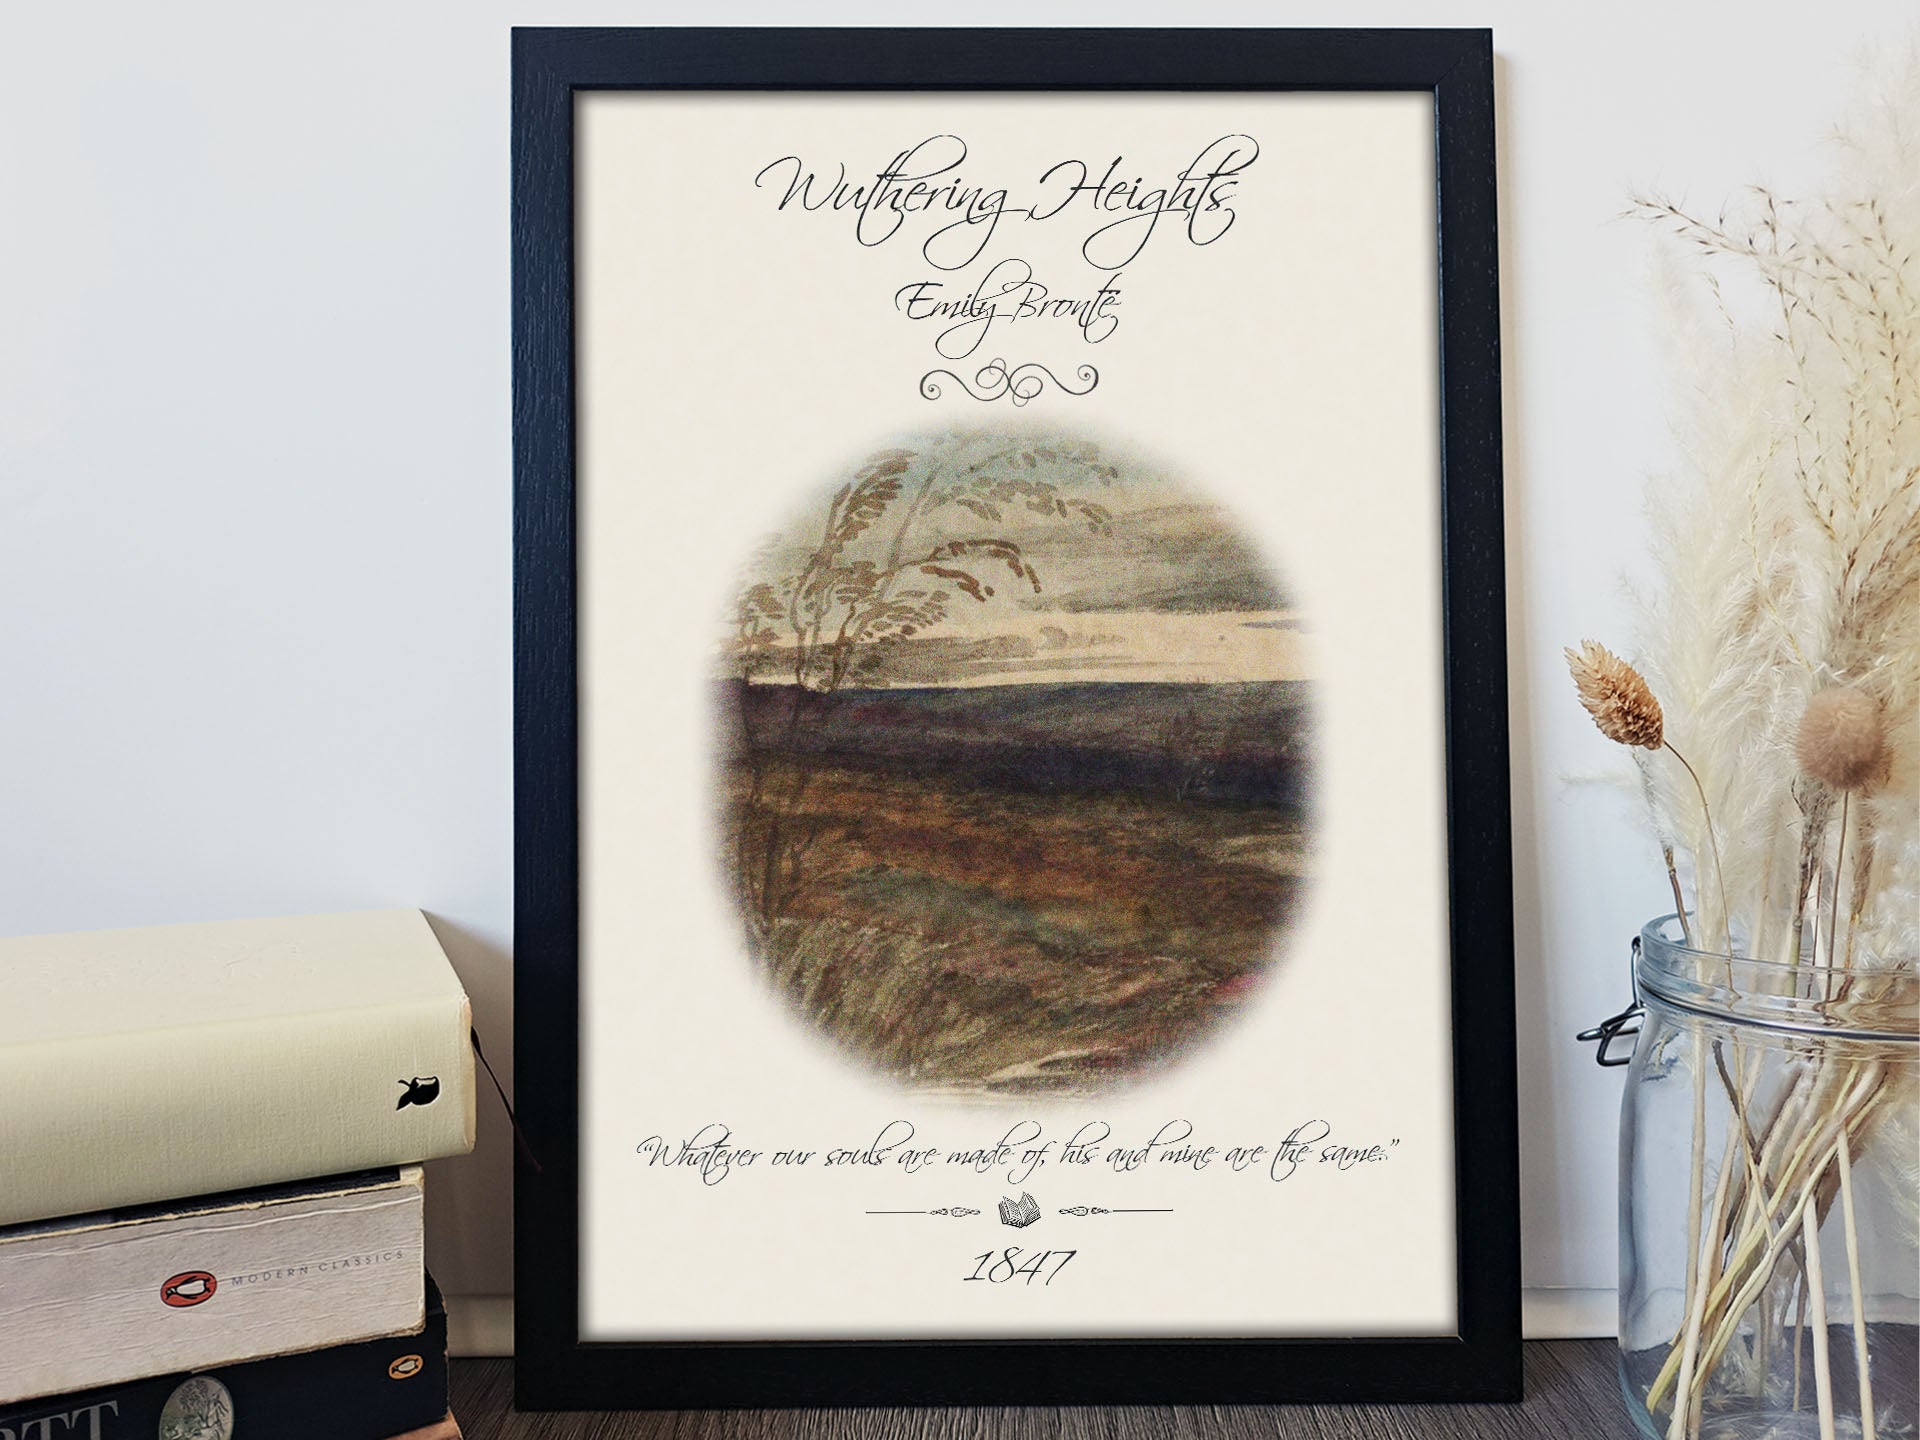 Wuthering Heights Book Cover Art Poster Print Emily Bronte Book Title Page  Art Print Classic Literary Wall Decor UNFRAMED 